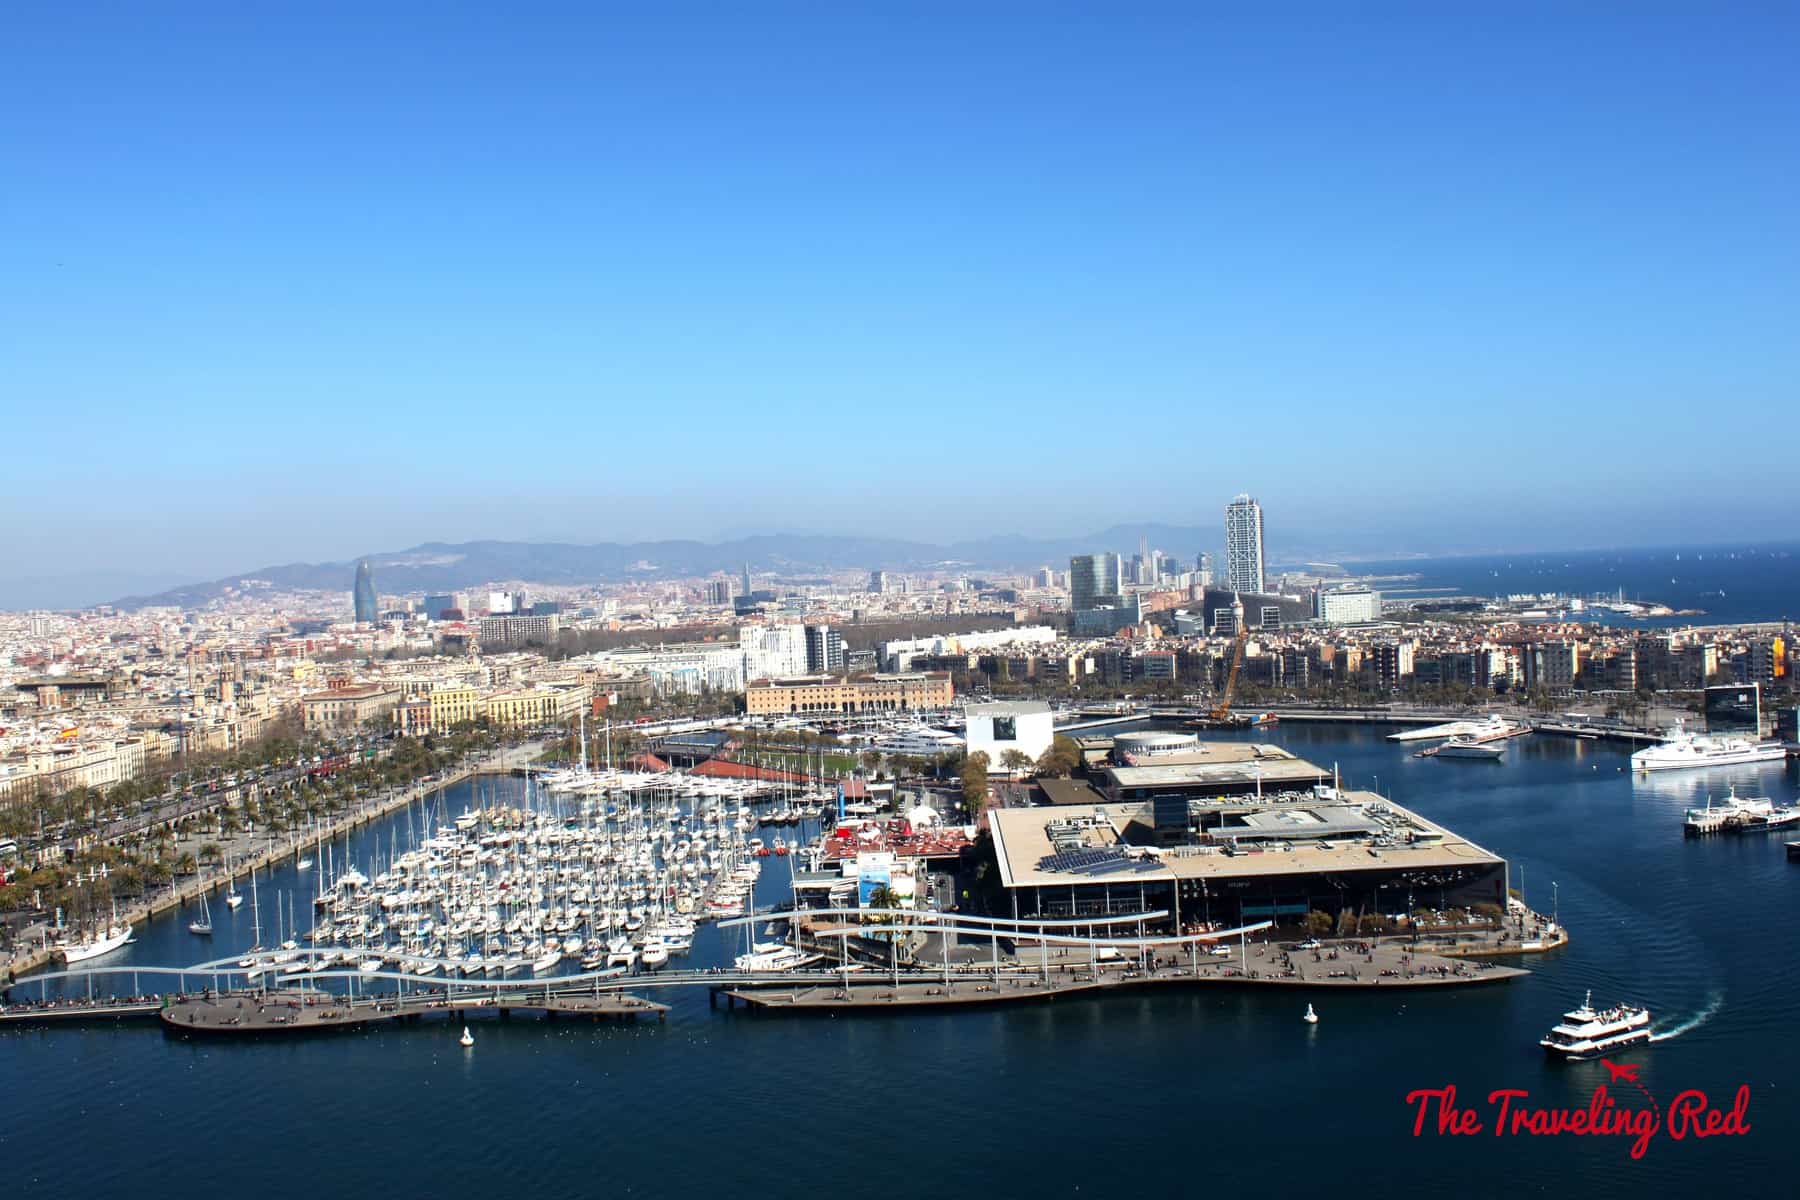 At the end of the boardwalk in Barceloneta is the Teleferic, a cable car that takes you up to Montjuic. The Teleferic has 360 degree views overlooking Barcelona, the beach and the marina full of mega-yachts.